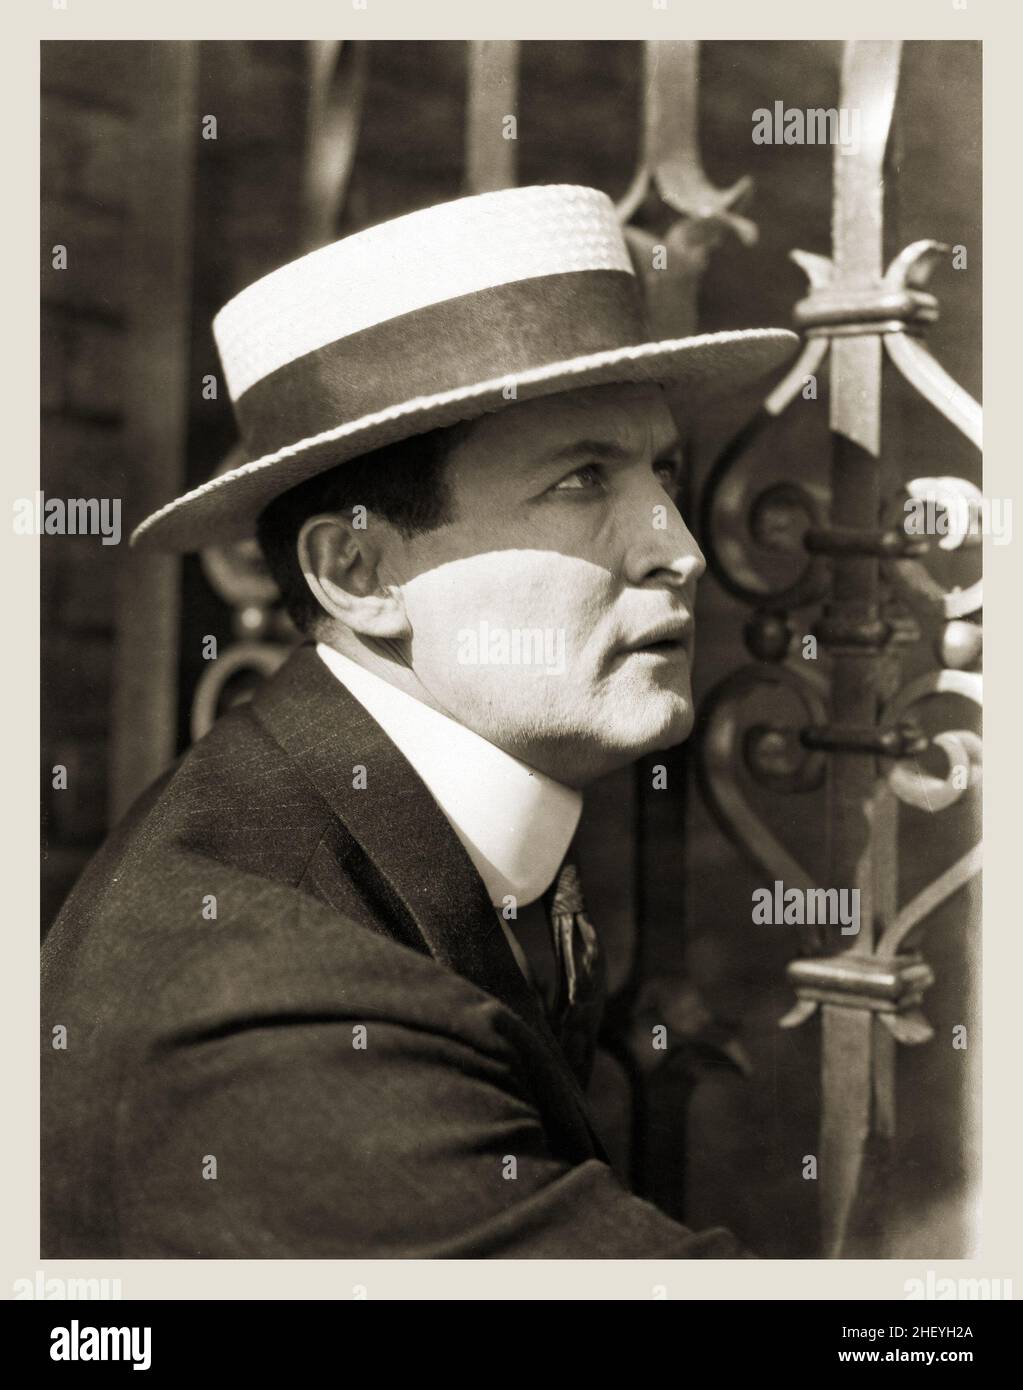 Vaudeville entertainer Harry Houdini (1874-1926), from the American film The Grim Game (1919). Stock Photo